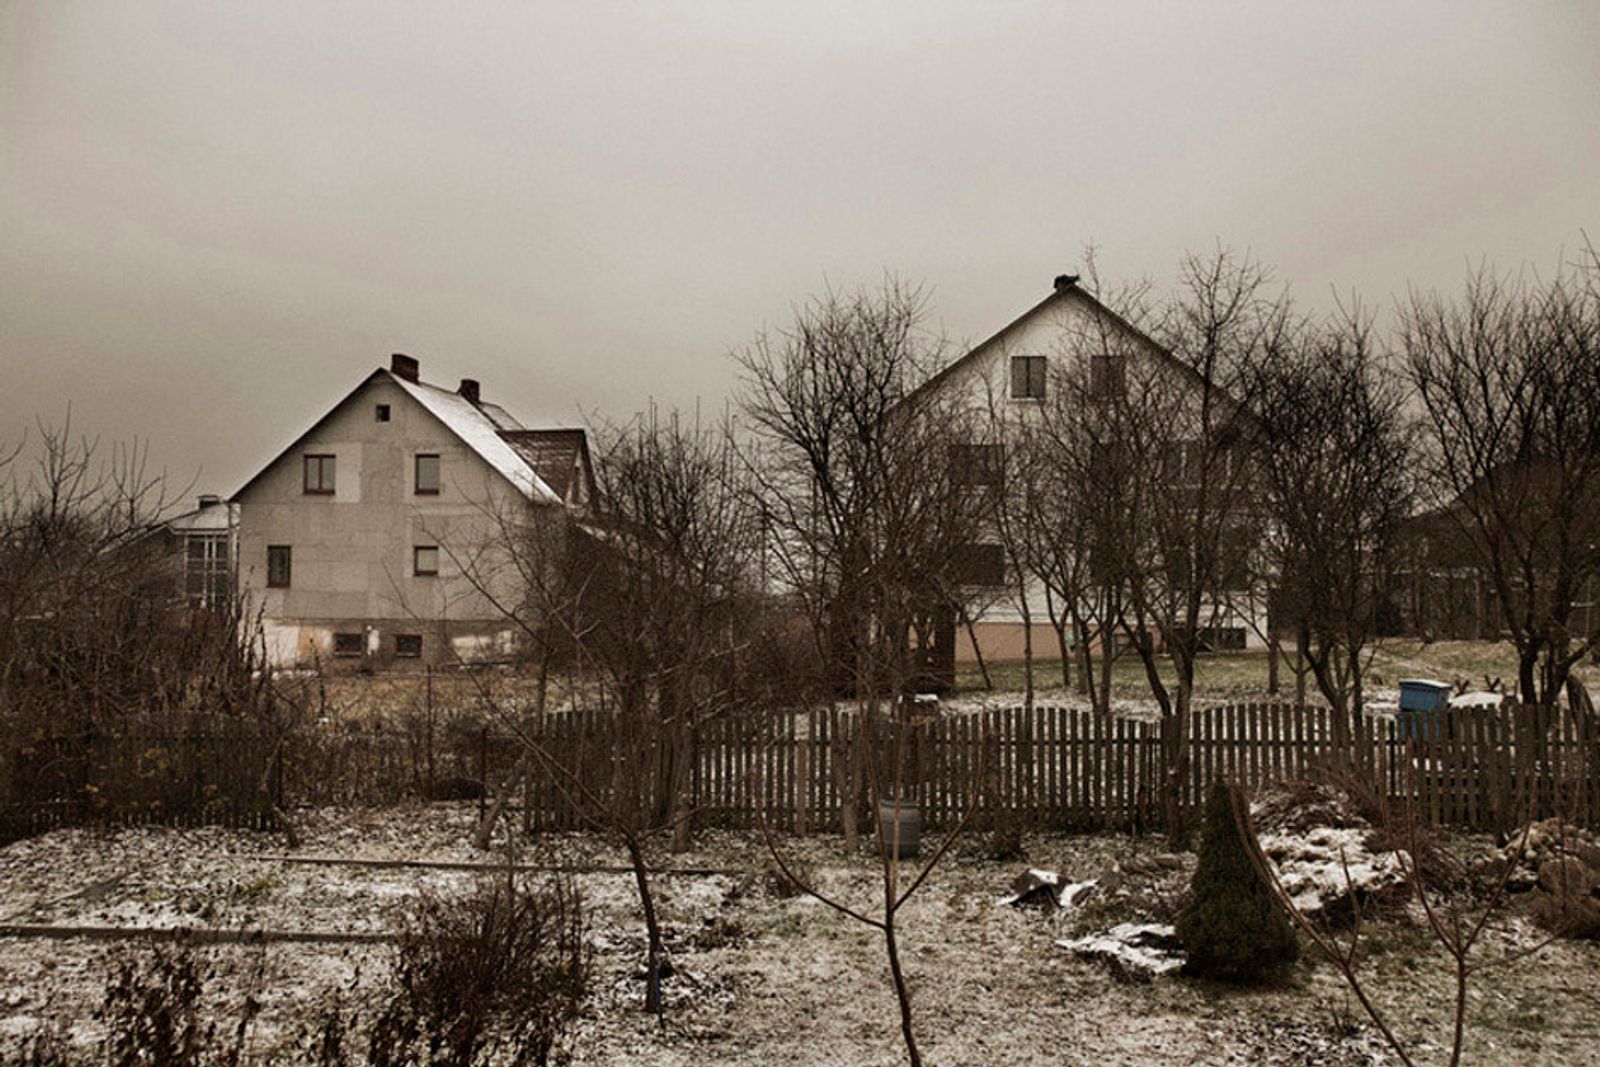 © Alessandro Vincenzi - The outskirts of Minsk, where the Belarusian Humanities Lyceum is located.